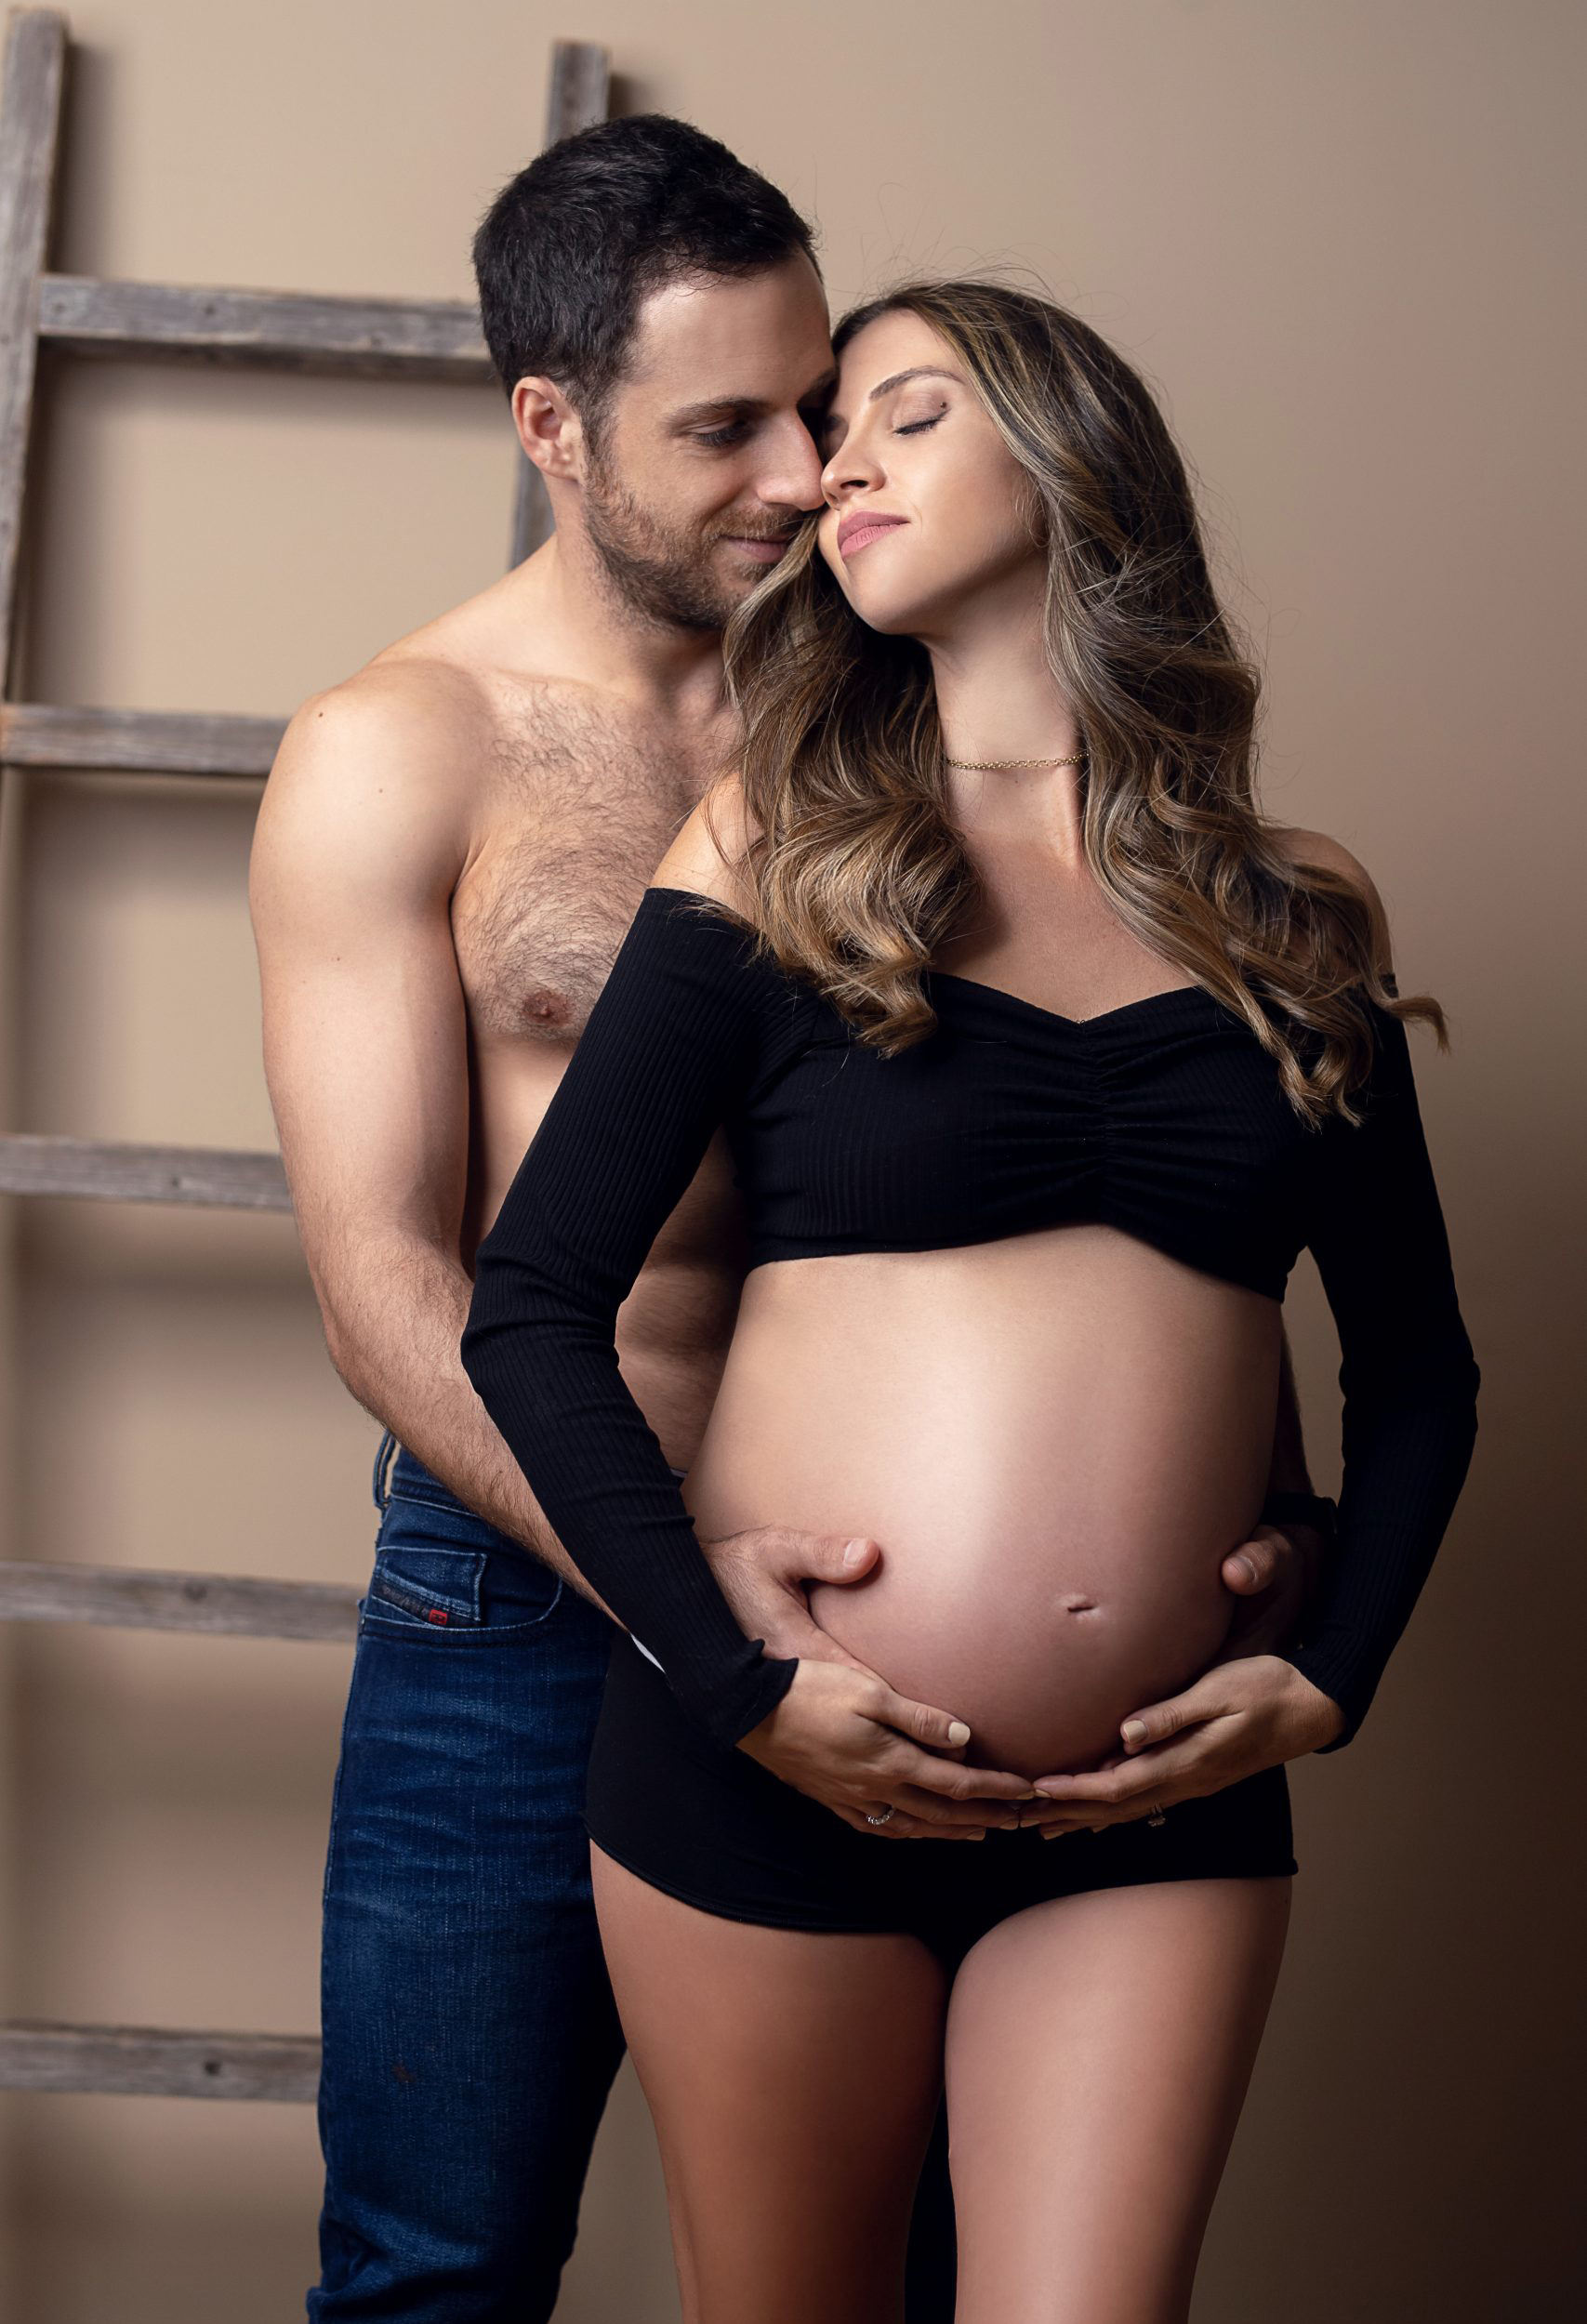 A couple in a maternity picture. The woman's belly is exposed, and the man is shirtless with his hand resting on her belly.